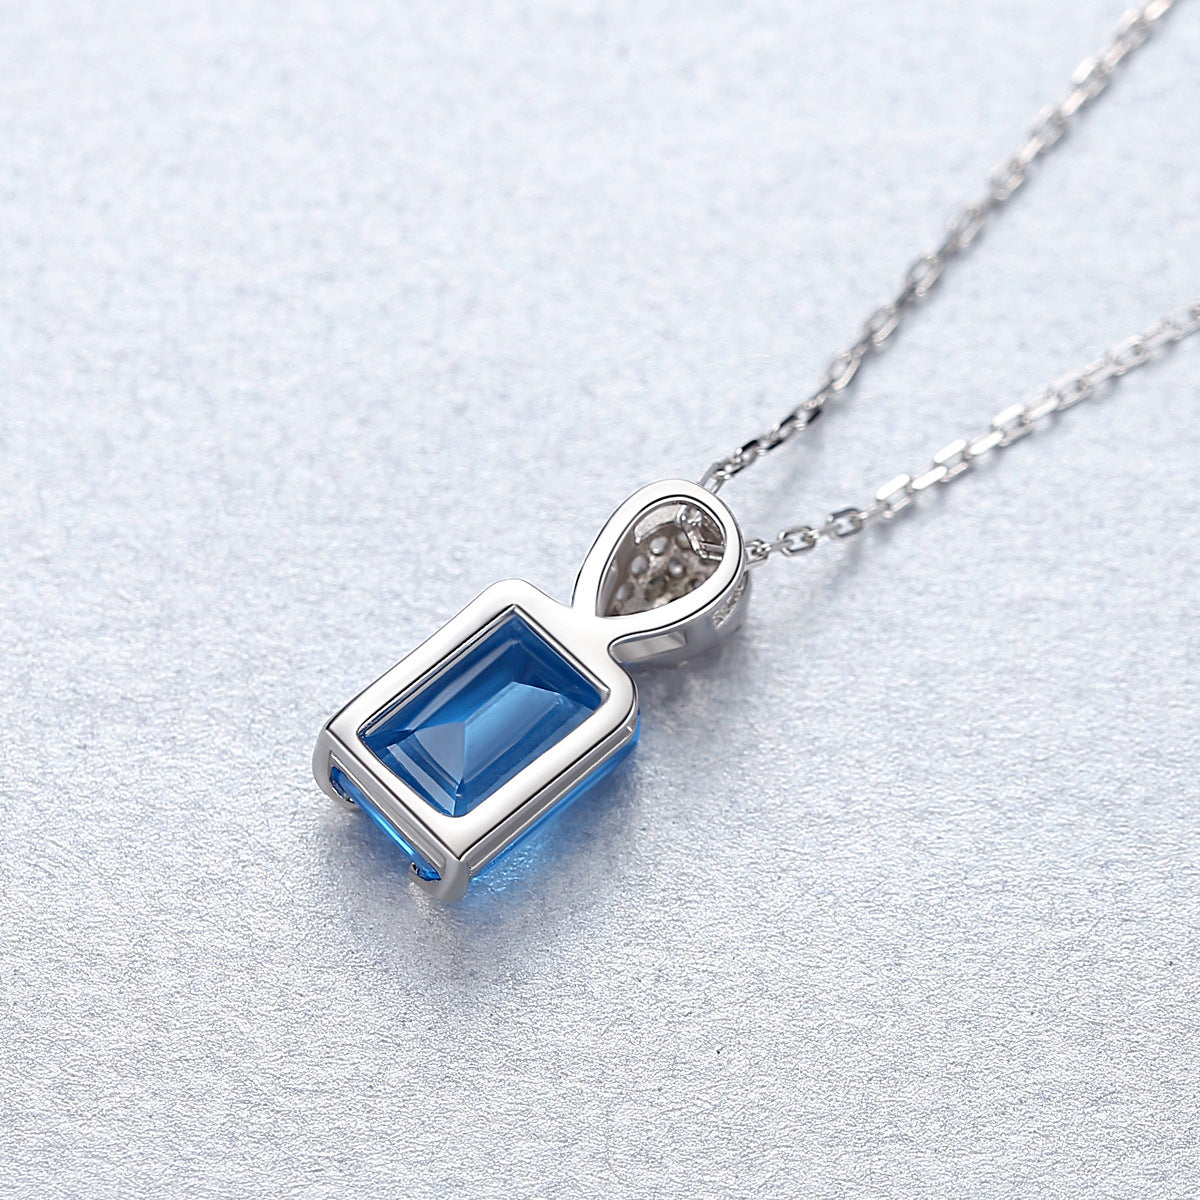 Gemstonely- Ins Style Creativity: S925 Silver Lock Necklace with Square Synthetic Cubic Zirconia Pendant and Blue Gemstone for Women